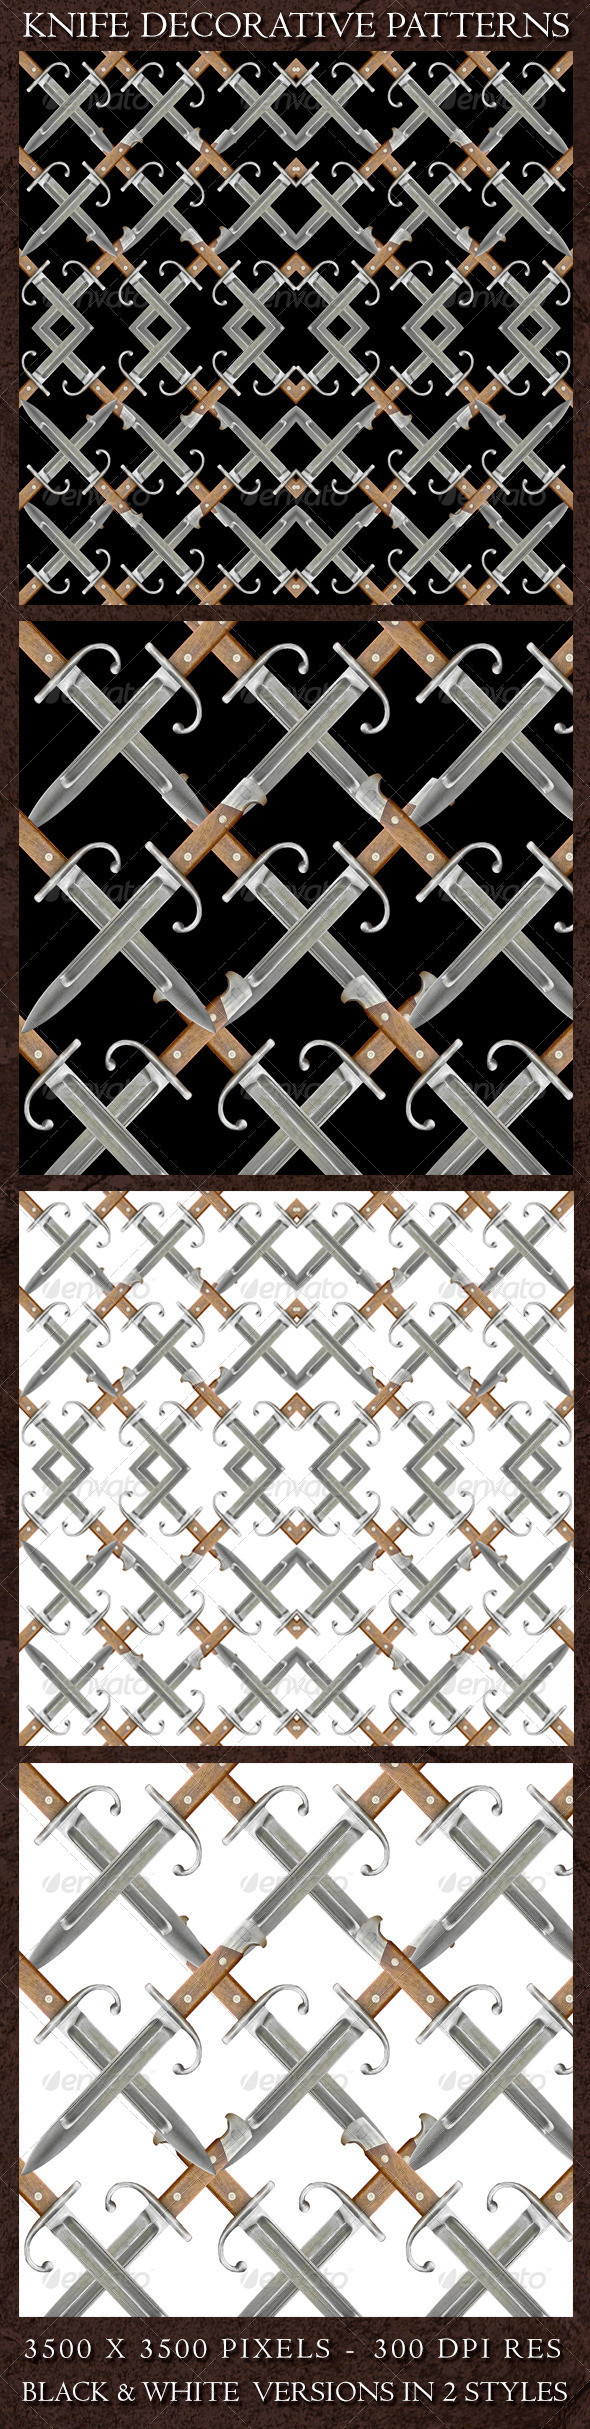 Preview knife decorative patterns